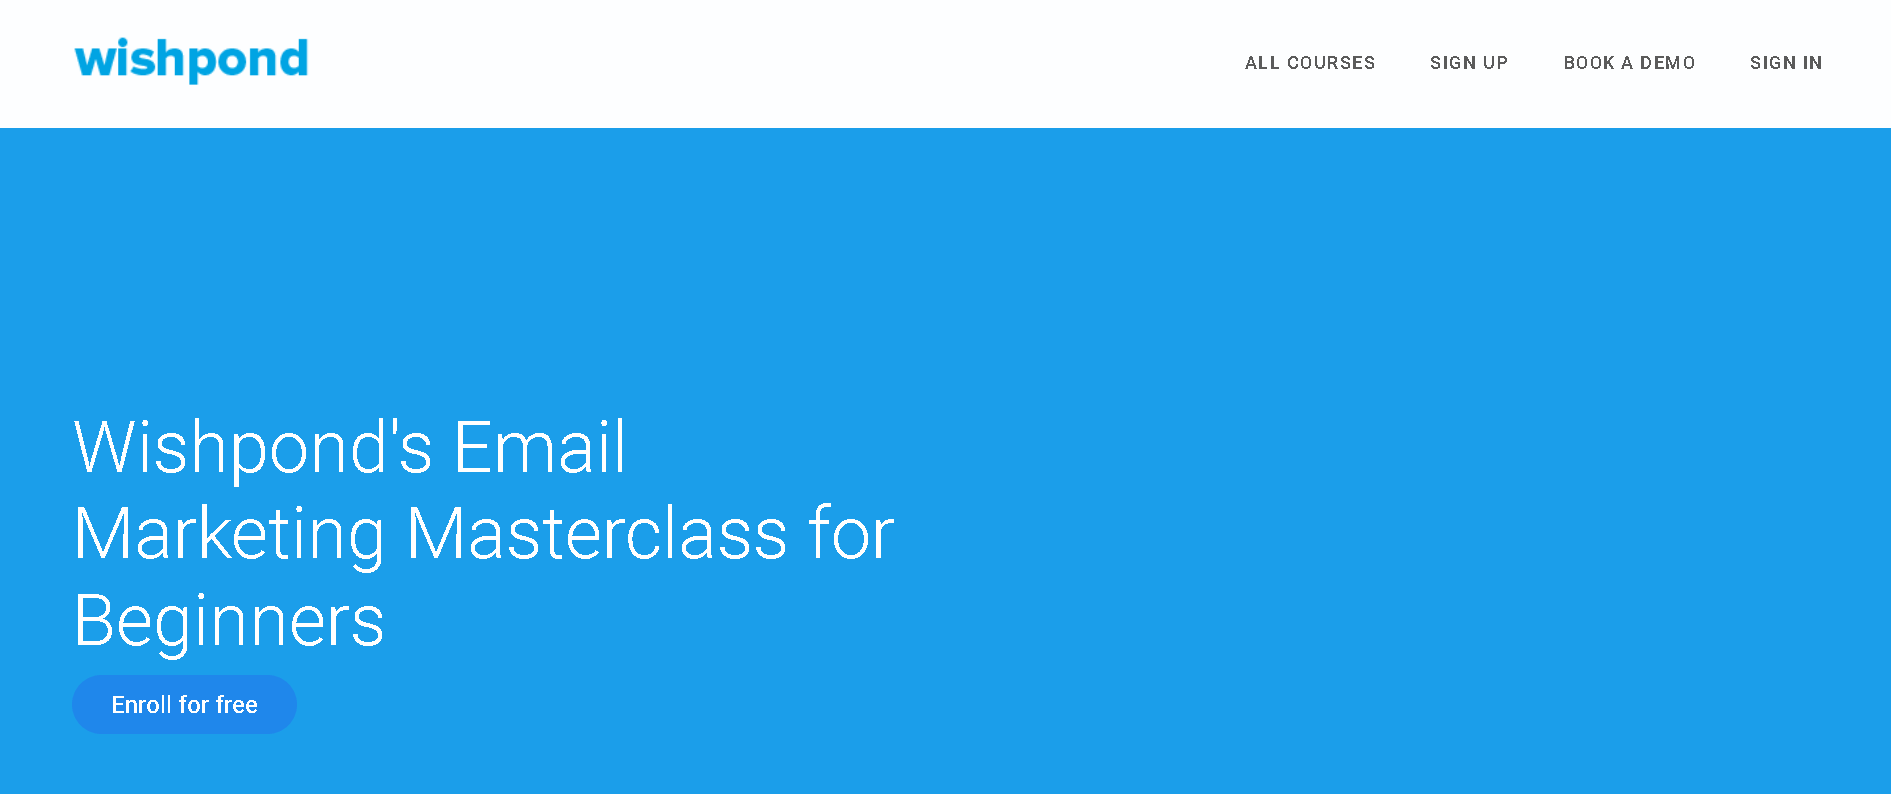 Wishpond Email Marketing Master Class for Beginnners